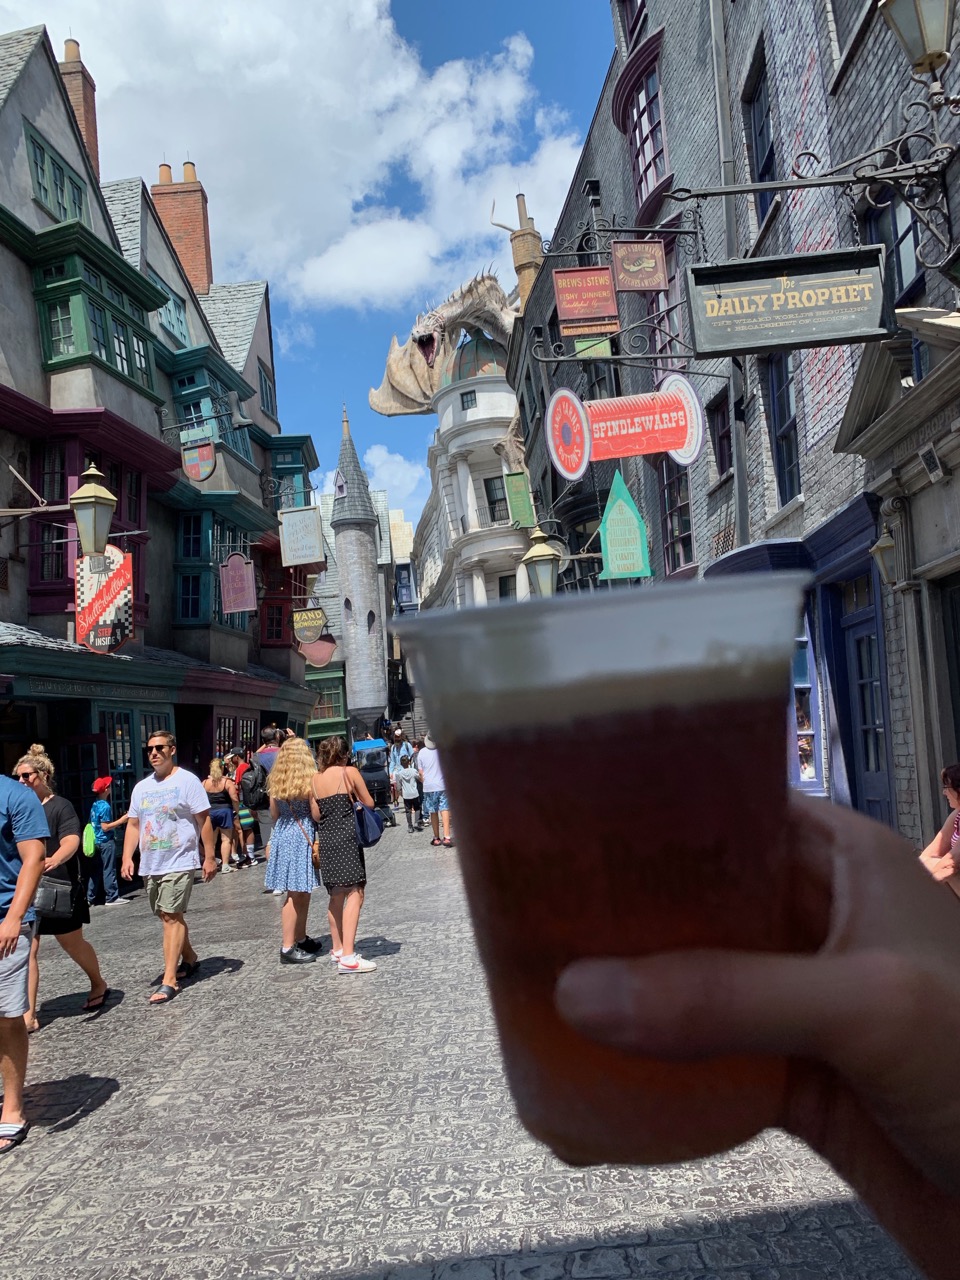 https://www.mousehacking.com/blog/universal-studios-florida-one-day-itinerary